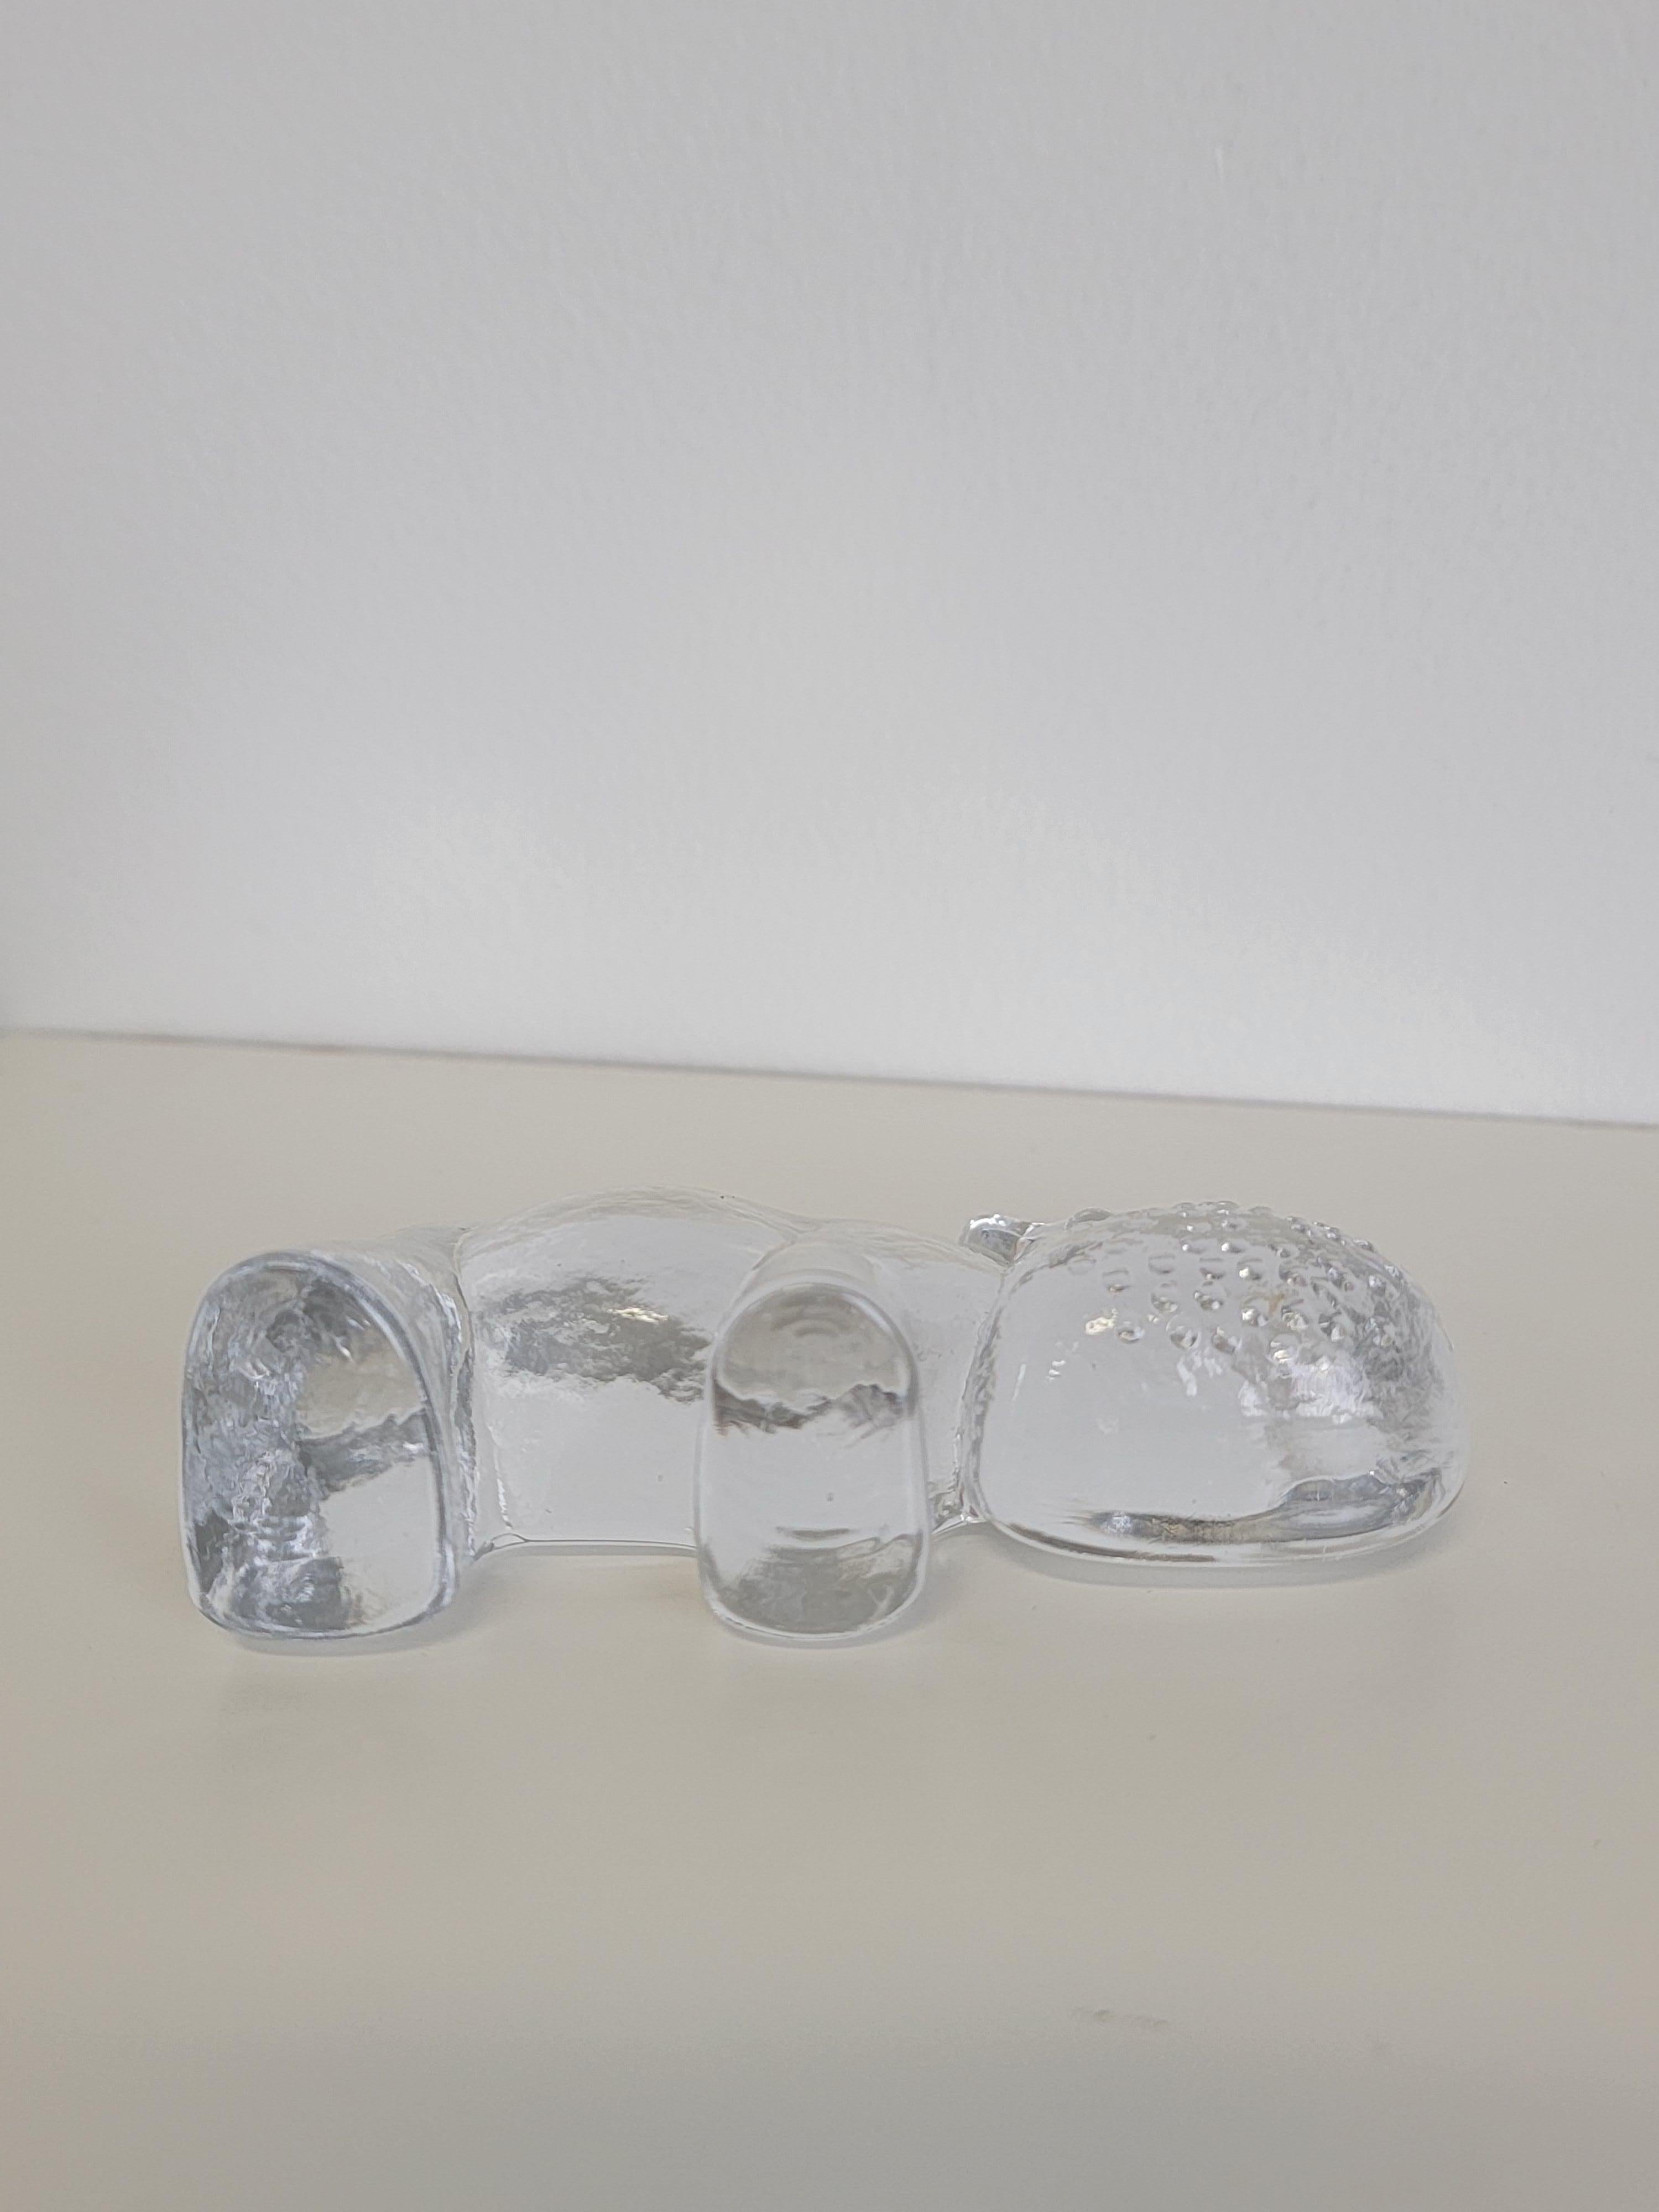 Other Glass Hippopotamus Paperweight By Bertil Vallien For Kosta Boda  For Sale